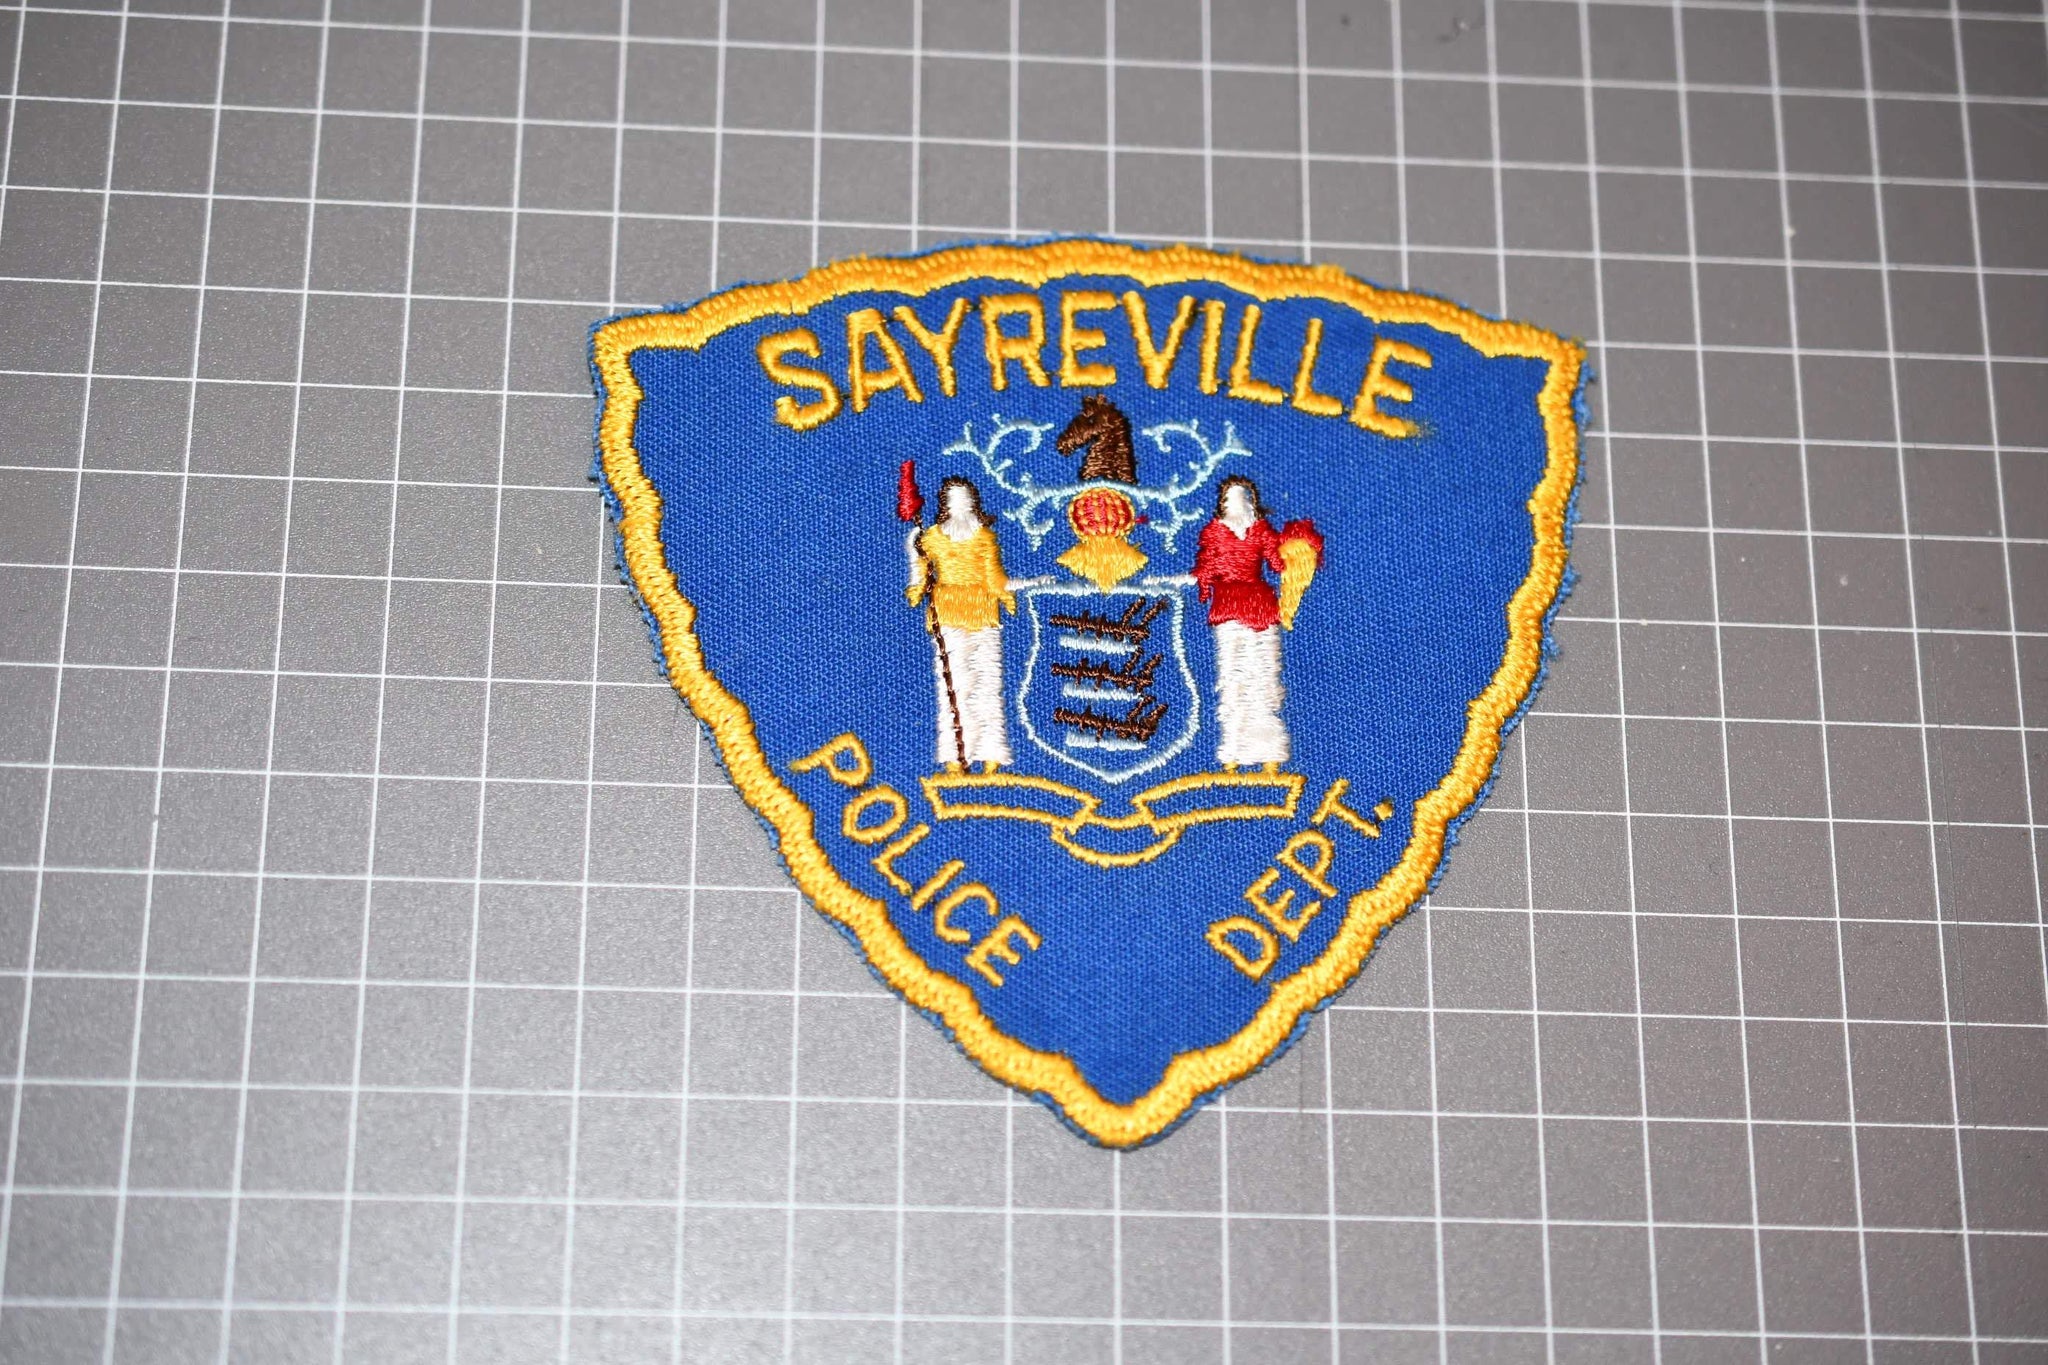 Sayreville New York Police Patch (U.S. Police Patches)